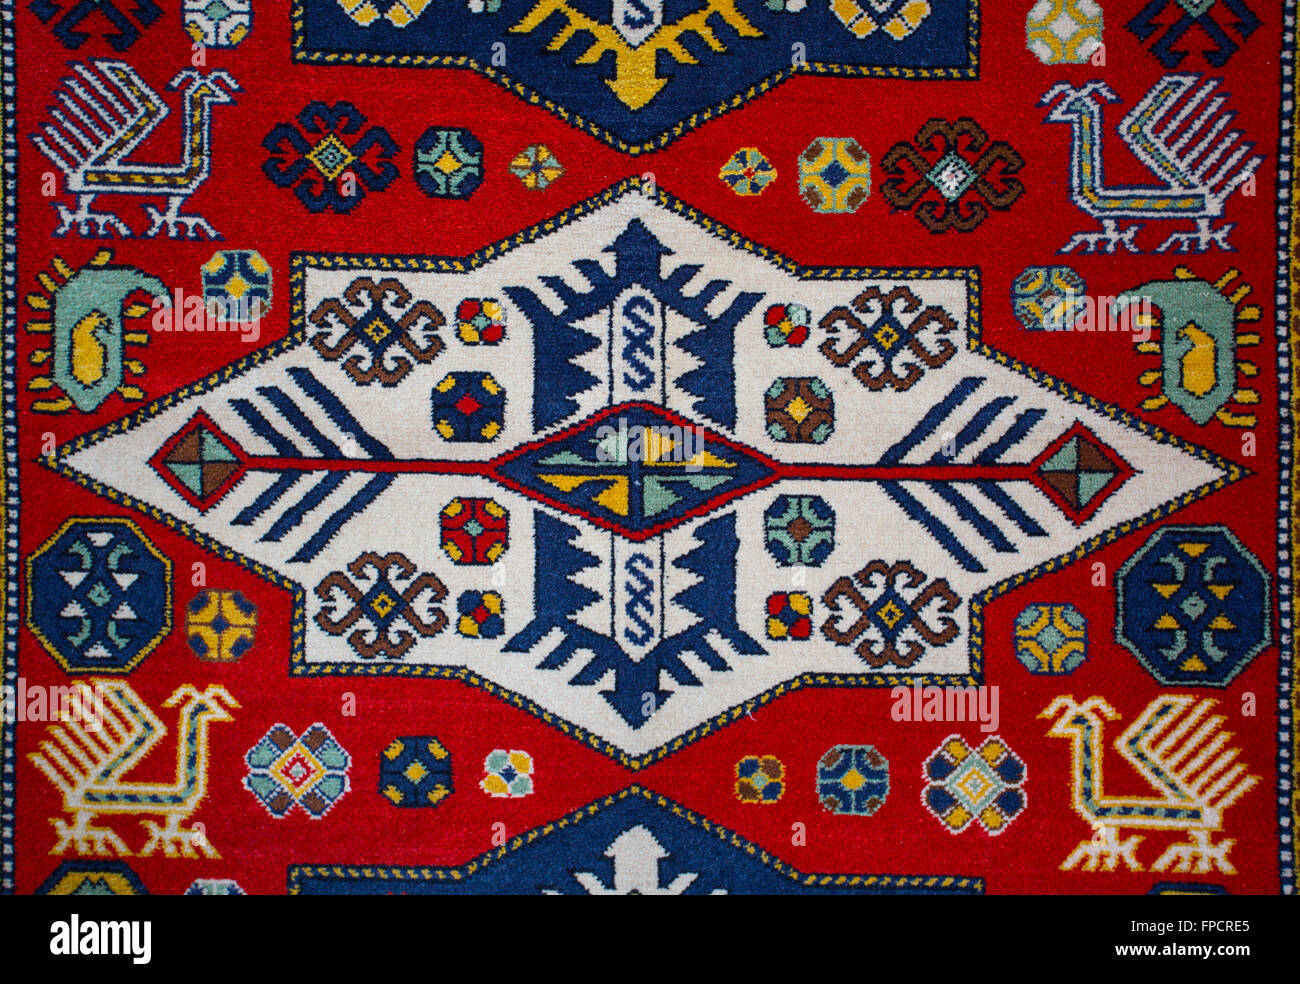 Armenian traditional carpet and rug ornaments and patterns Stock ...